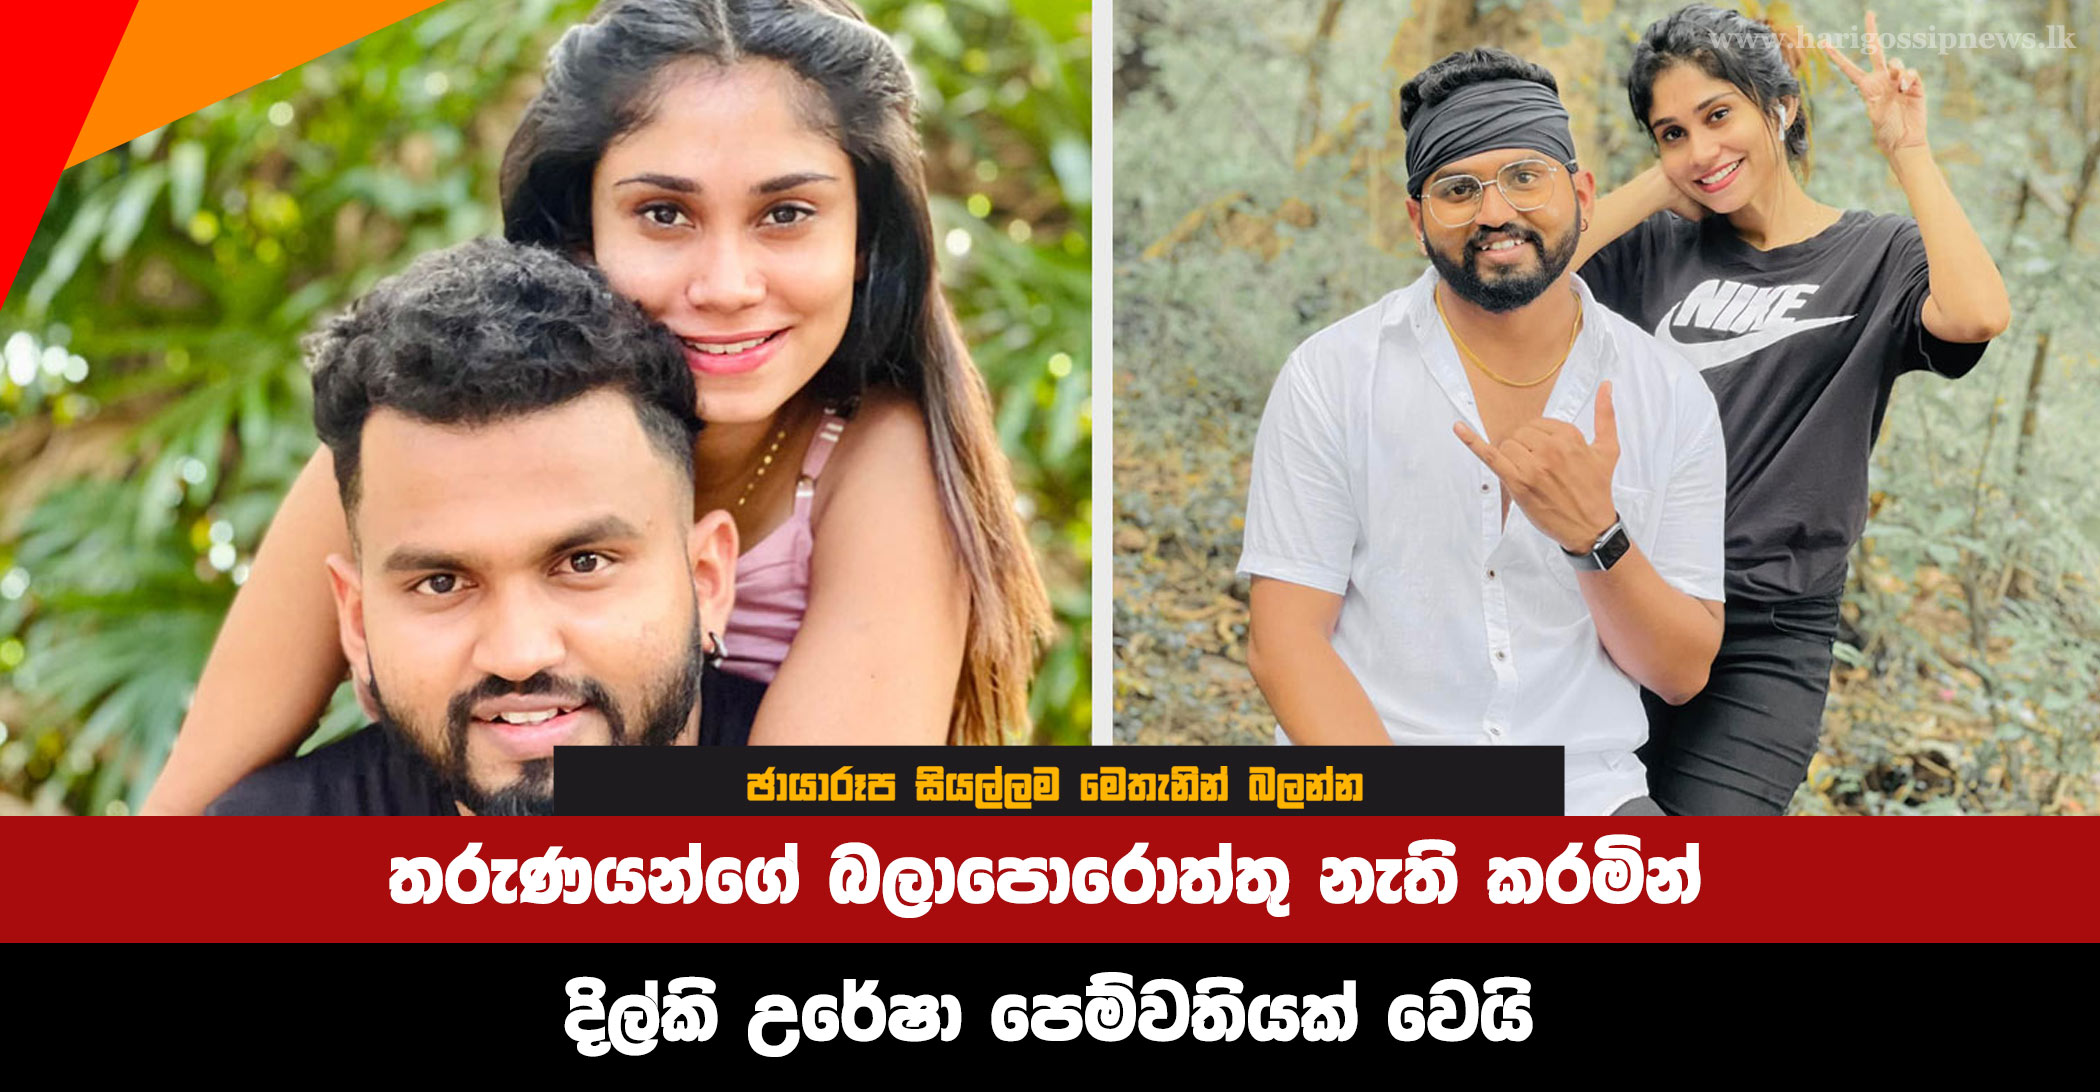 Dilki-Uresha-becomes-a-girlfriend,-frustrating-the-youth